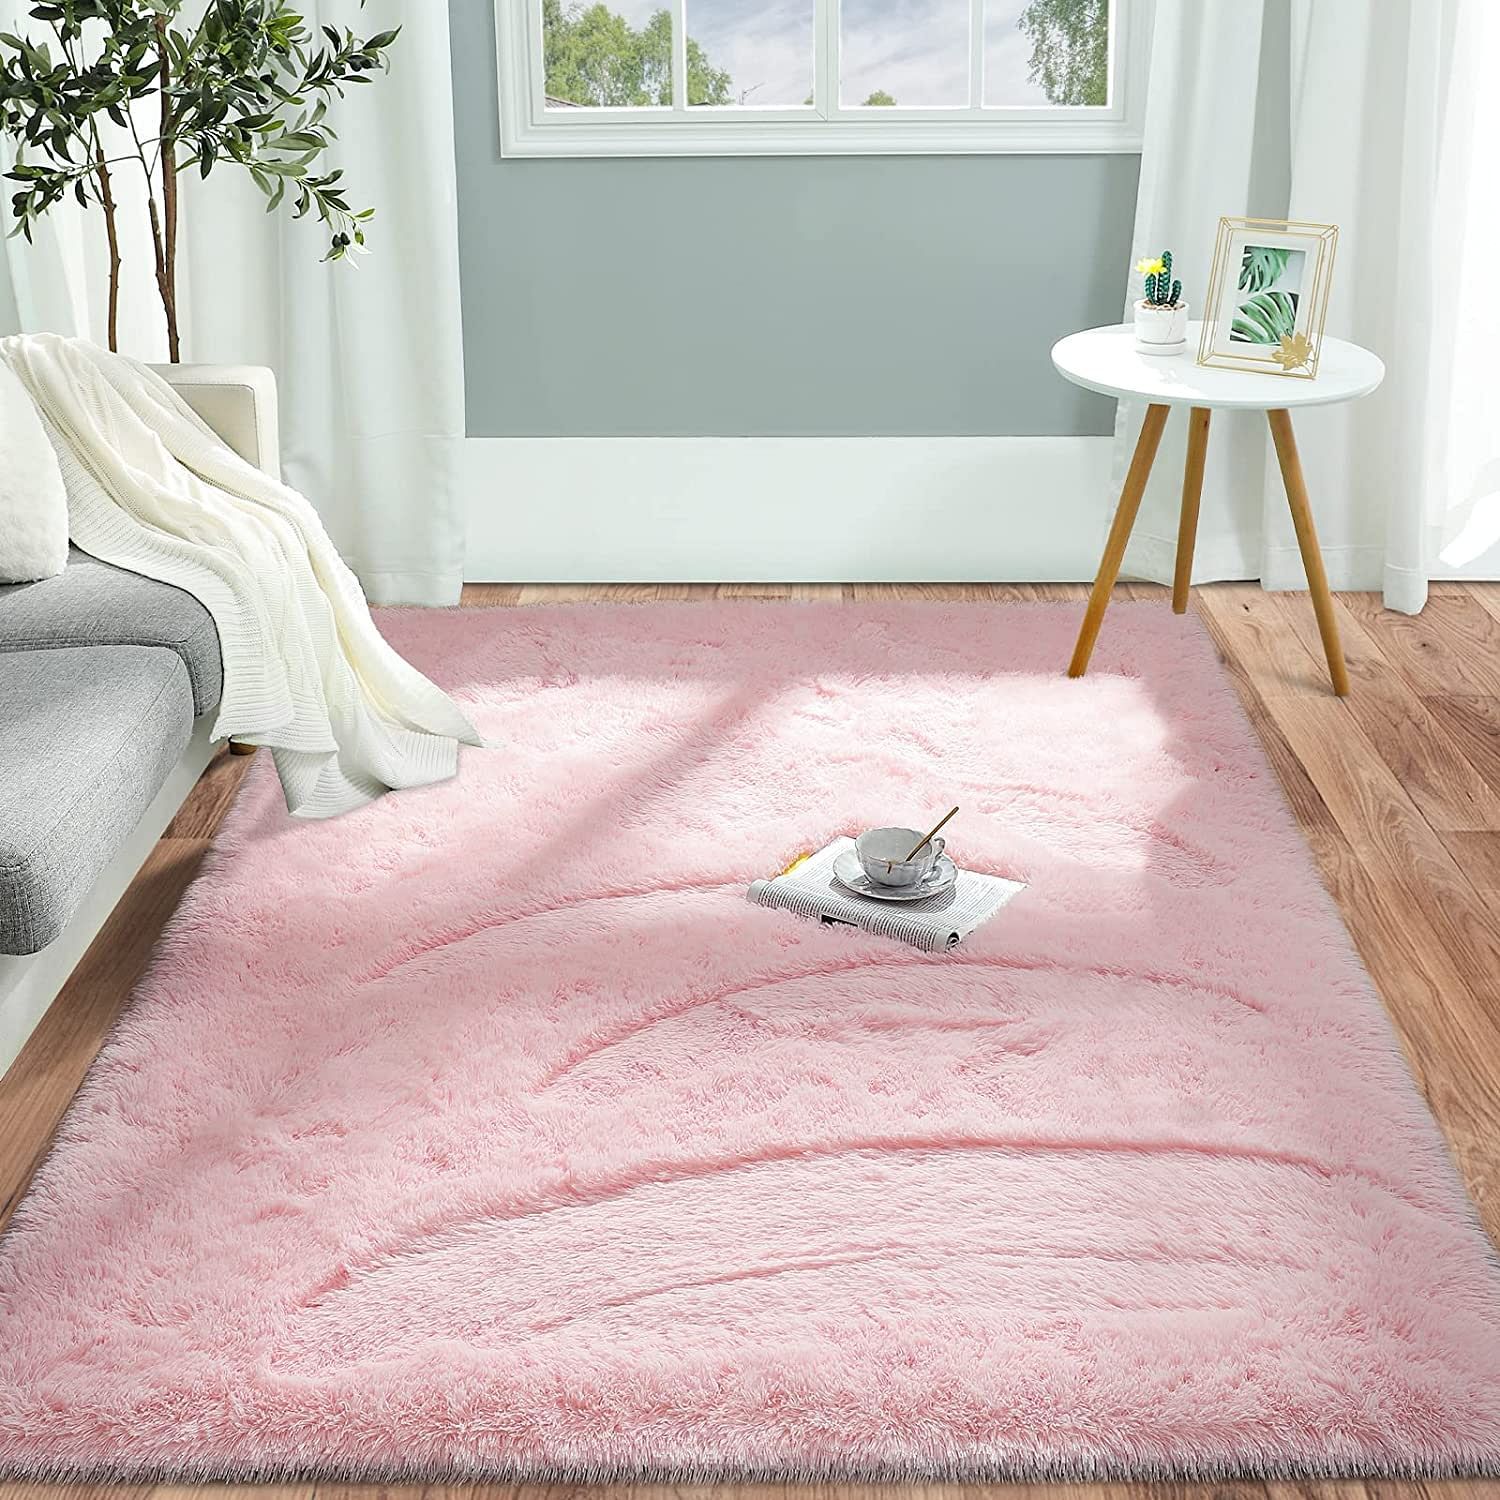 Pettop Fluffy Shaggy Area Rugs For Girls Bedroom,3X5 | Ubuy India With Regard To Light Pink Rugs (View 8 of 15)